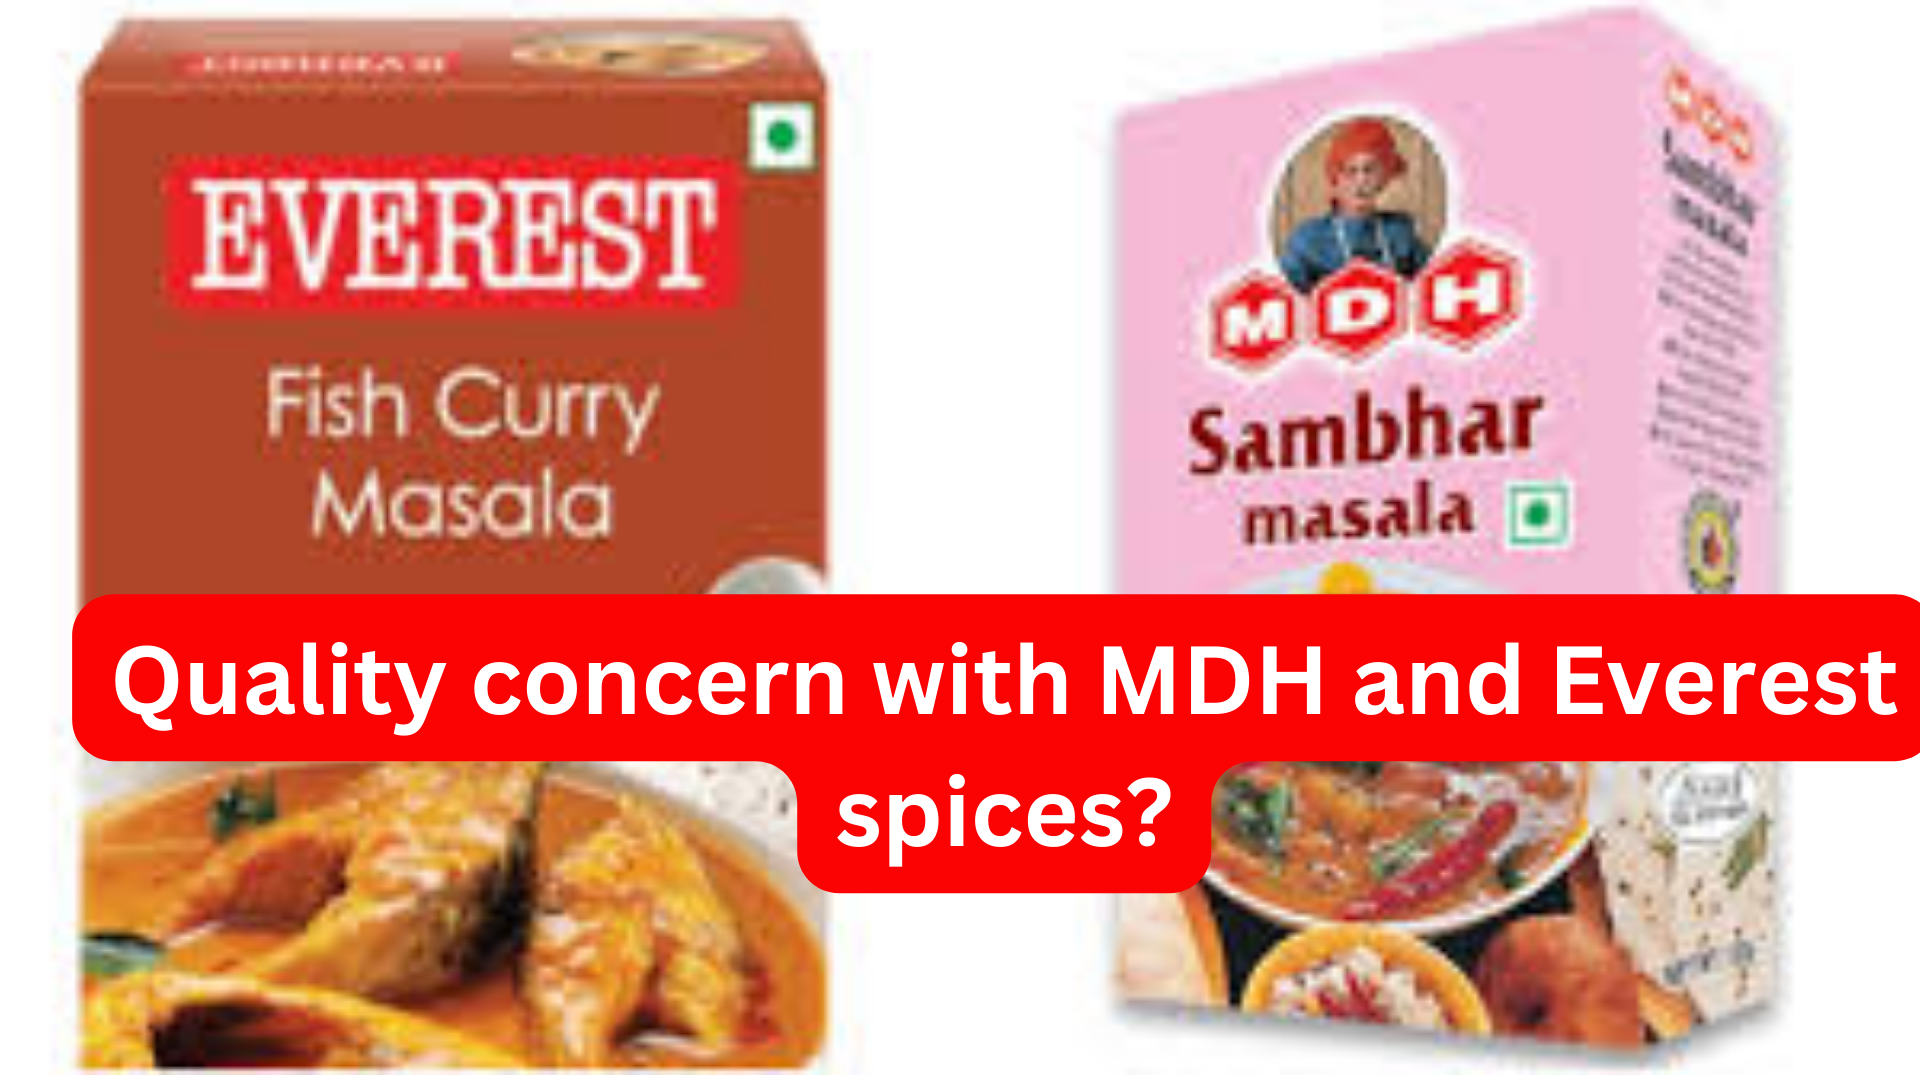 What is the quality concern with MDH and Everest spices? India, known as the leading producer, consumer, and exporter of spices worldwide,